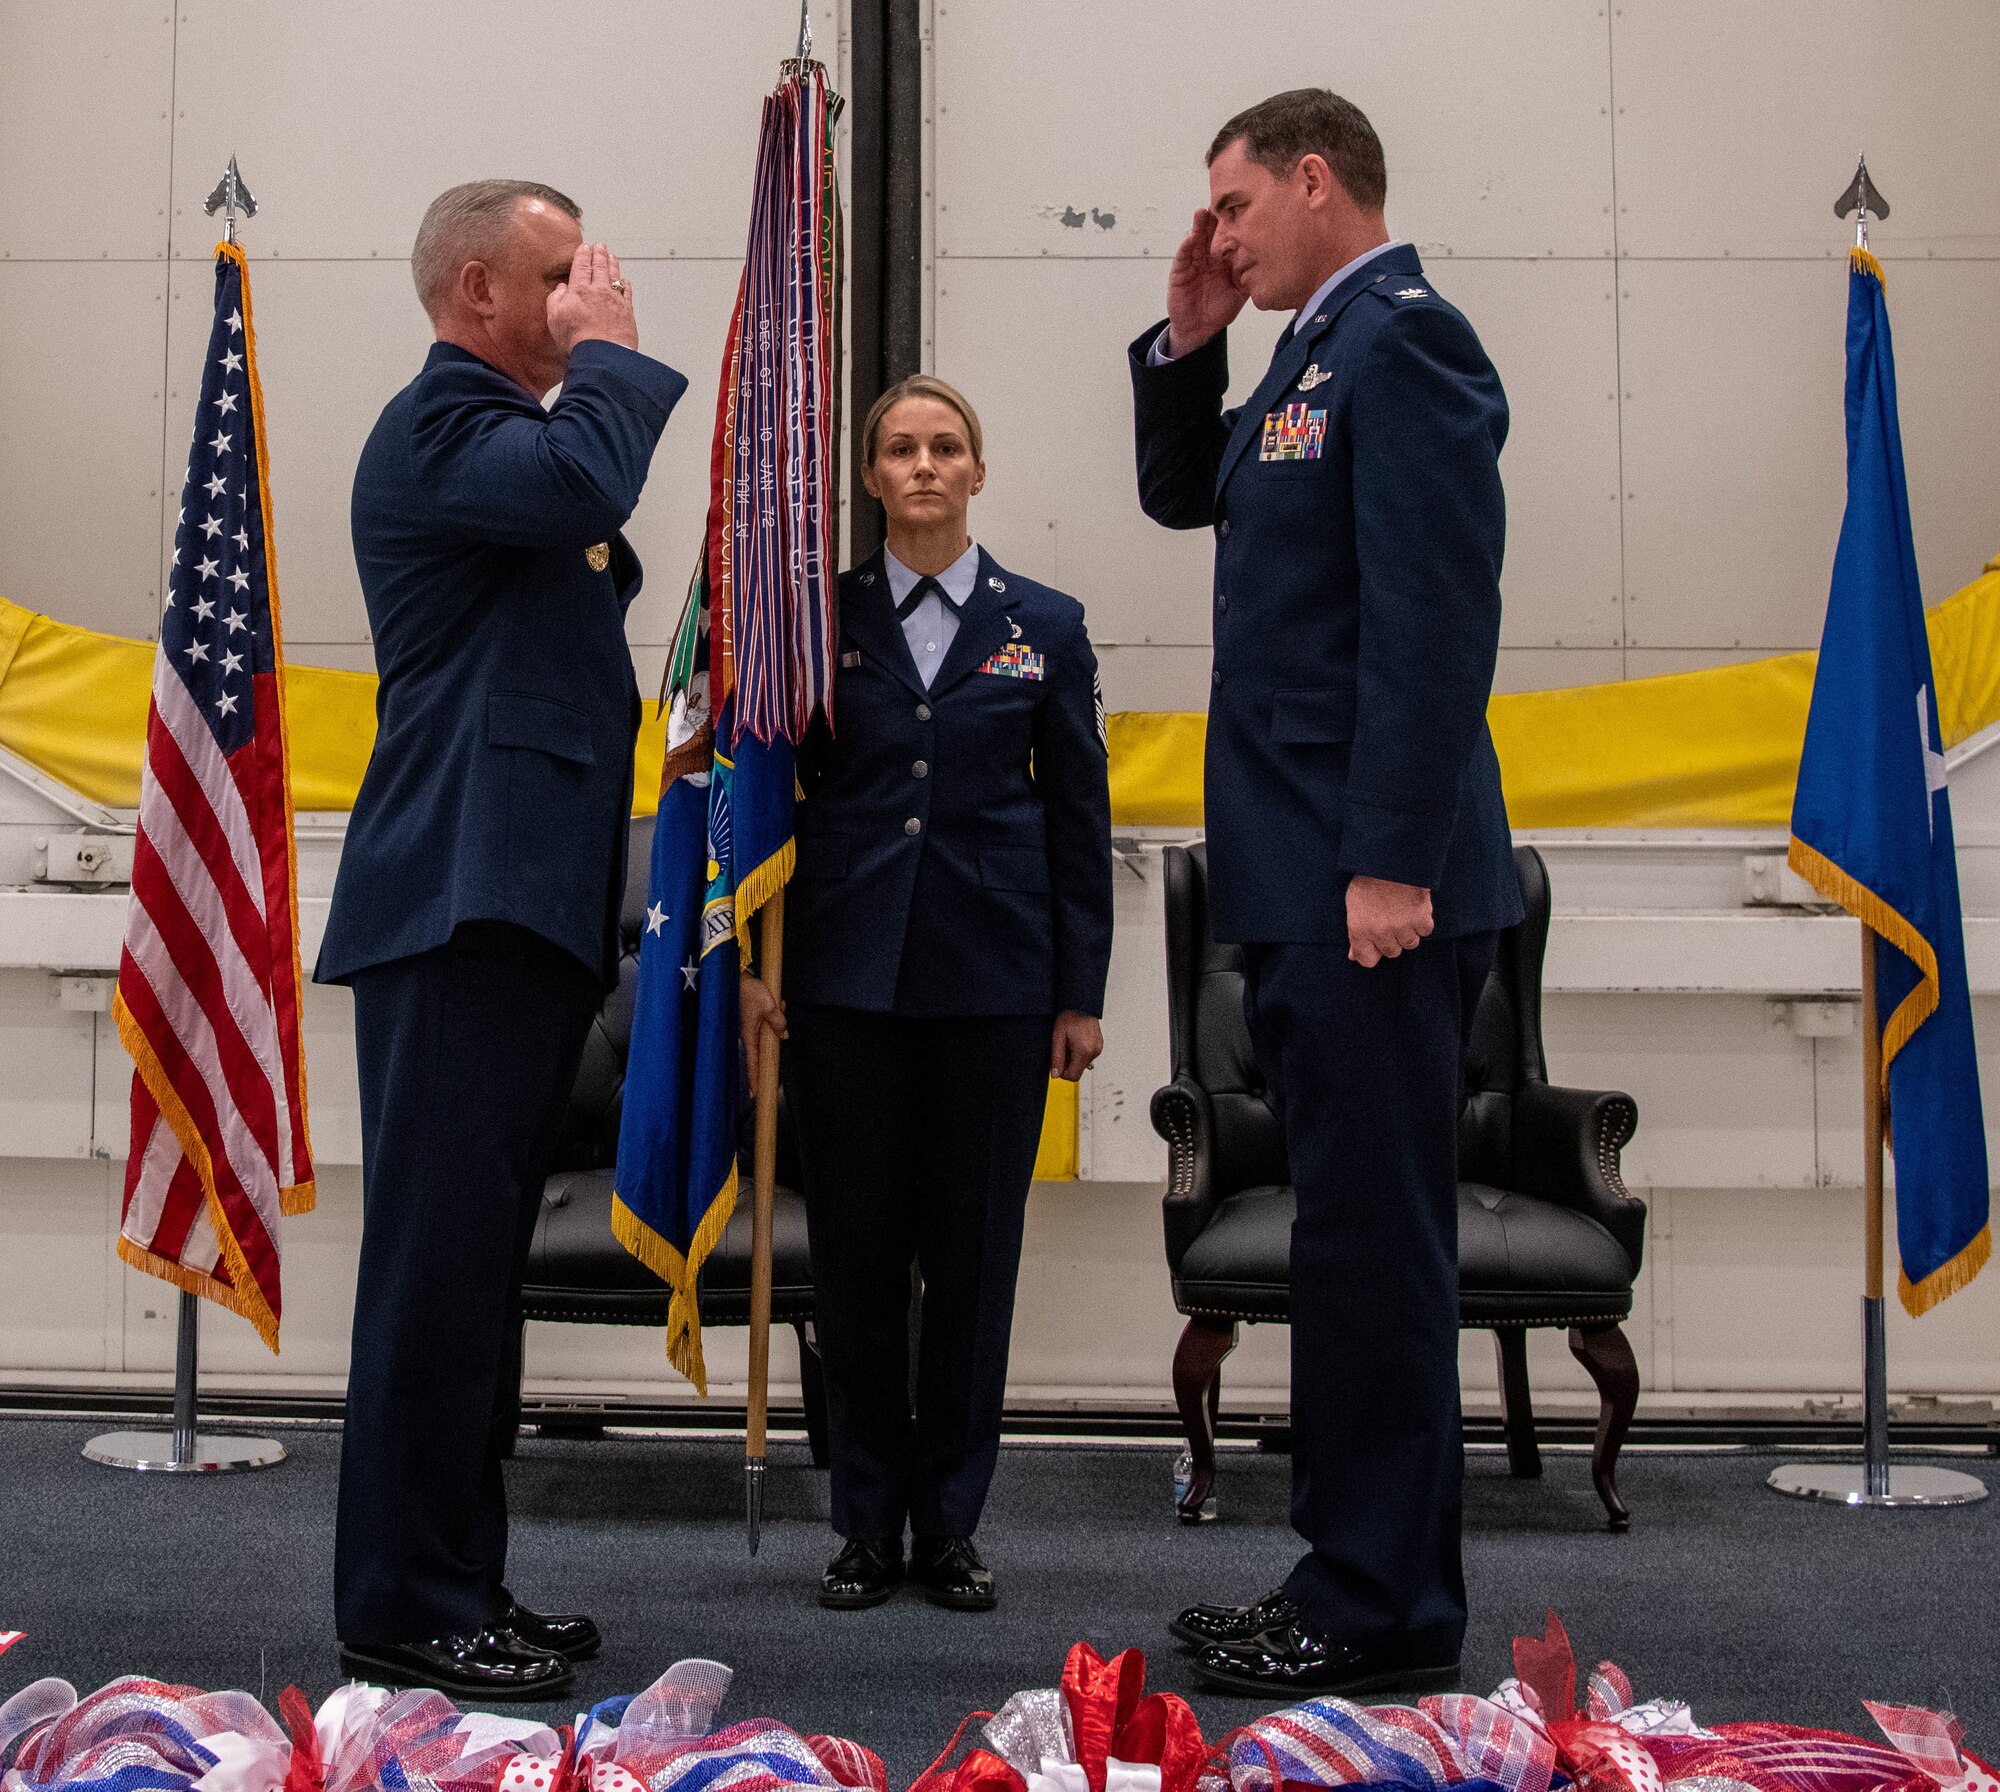 One man saluting another man in Air Force uniform, at a military ceremony.